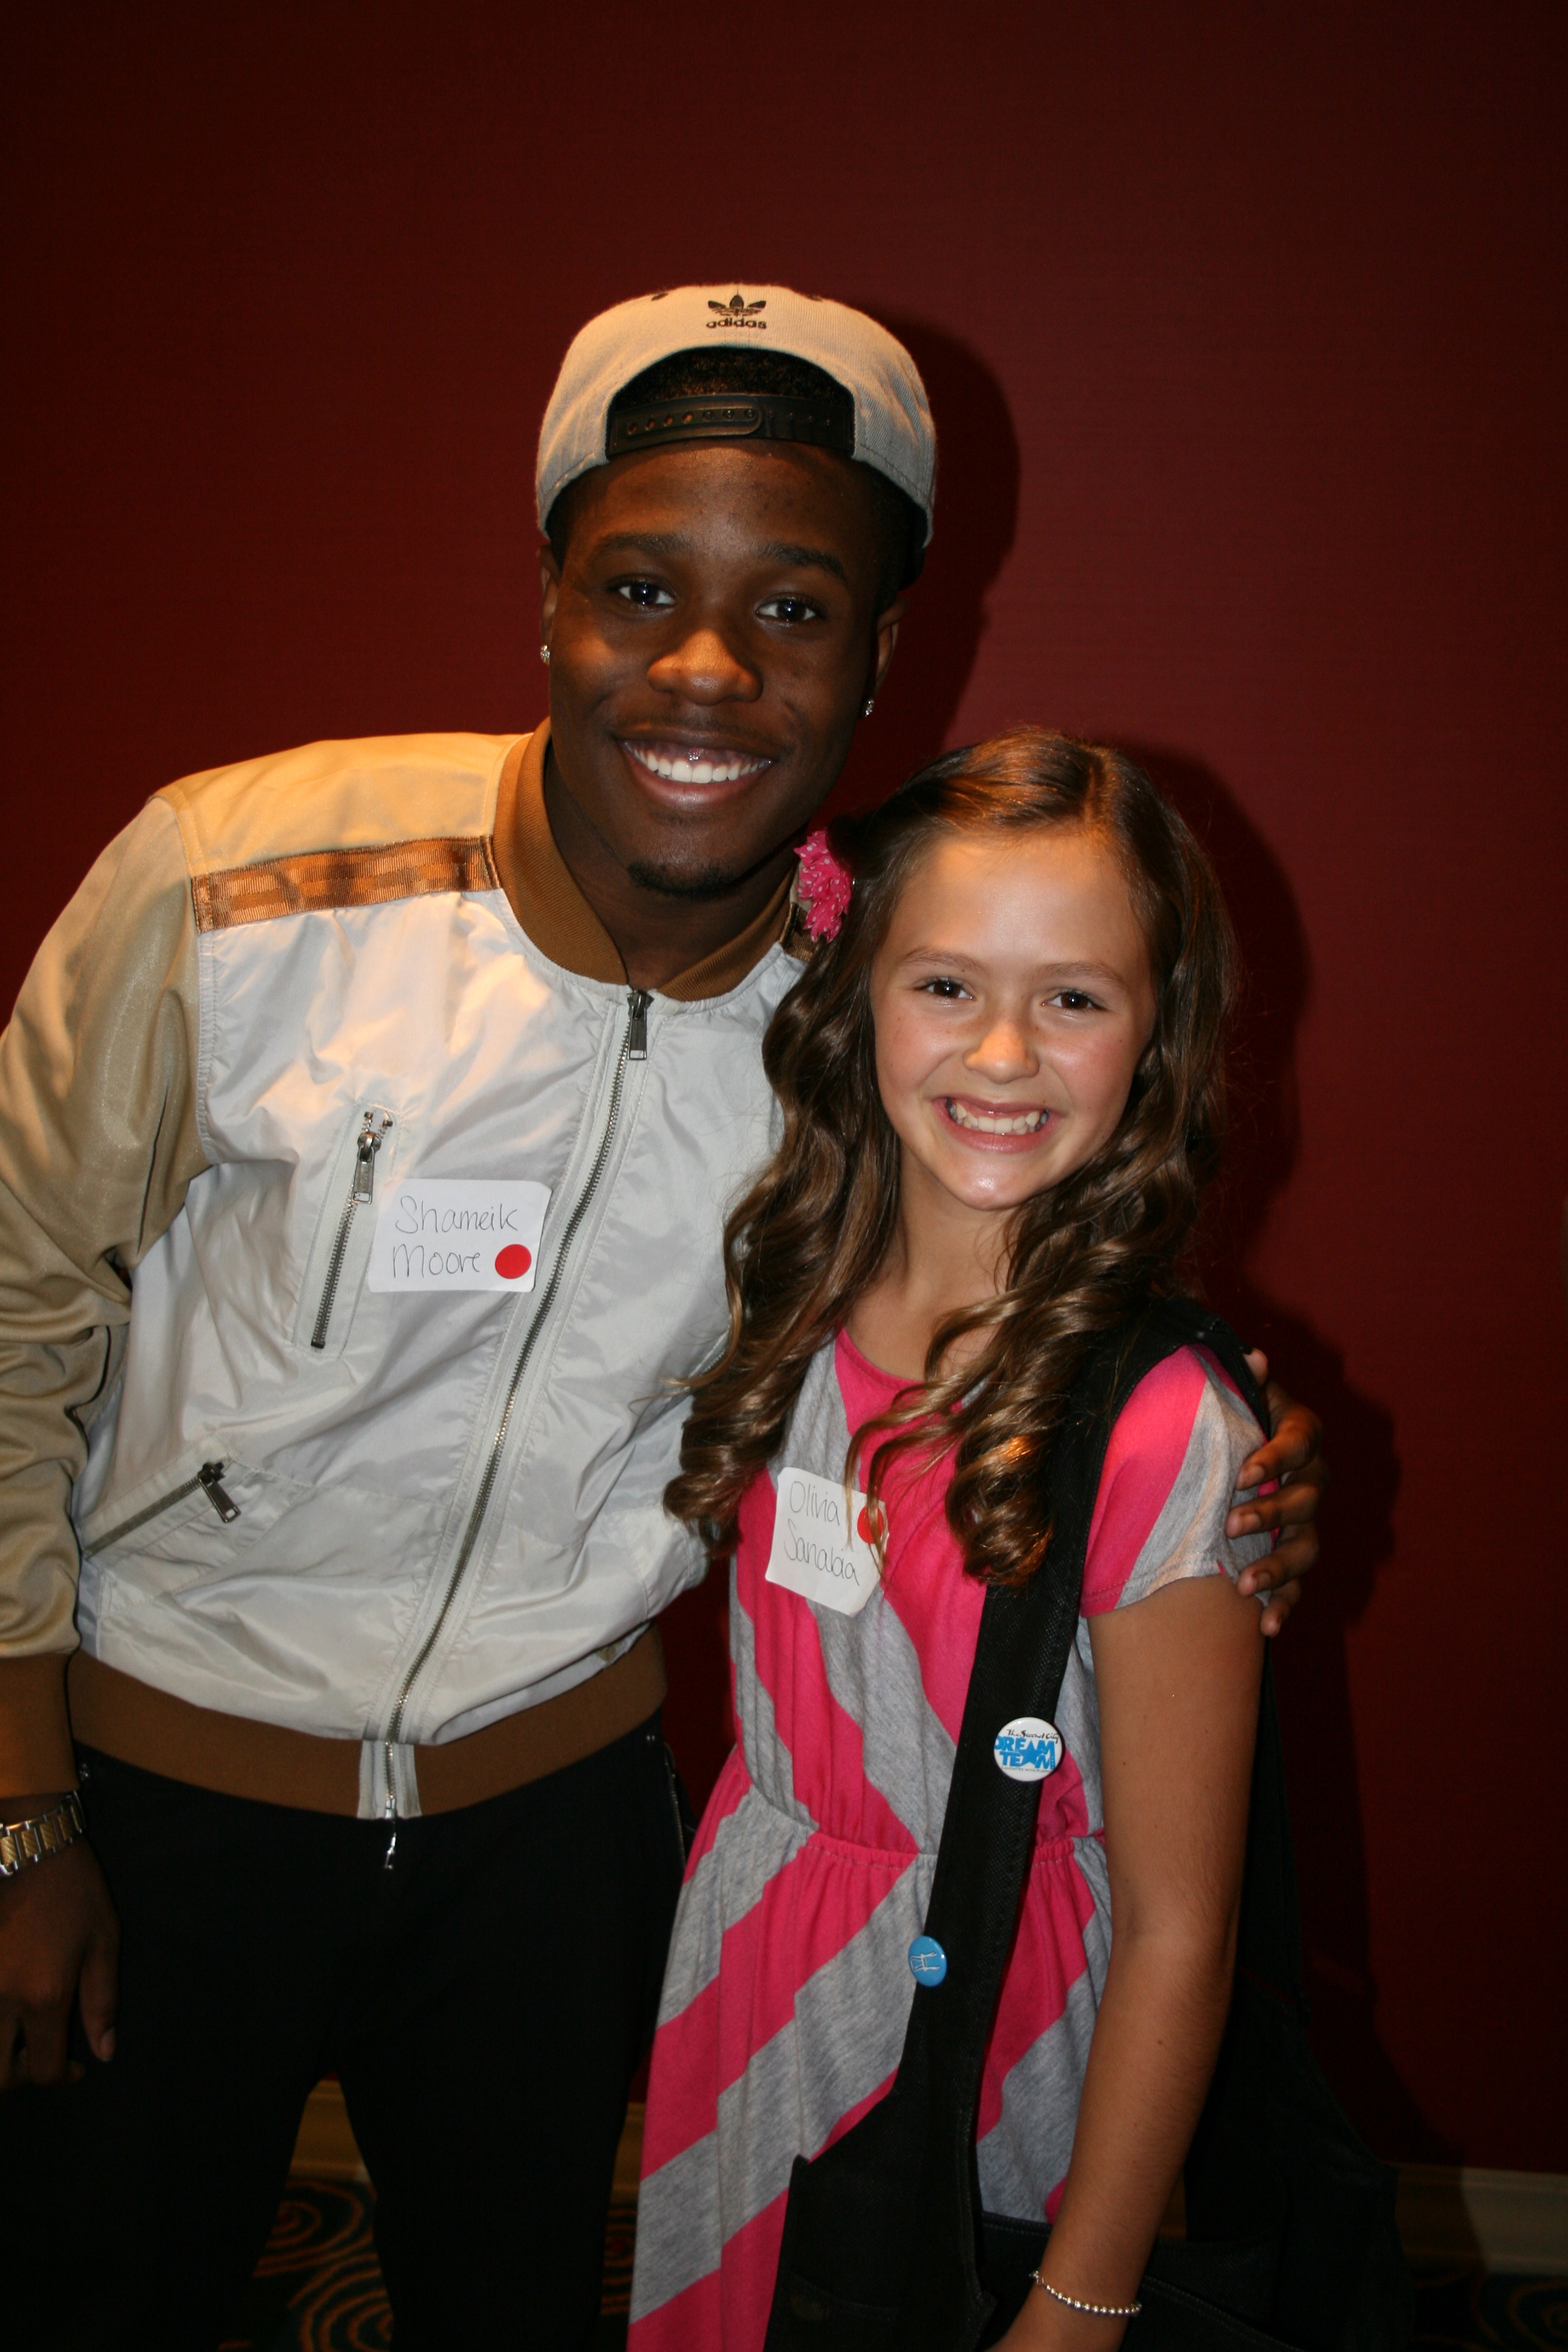 Olivia Sanabia with Shameik Moore from Incredible Crew! Got to run into Shameik after working with him on the show Incredible Crew...a funny sketch comedy show!